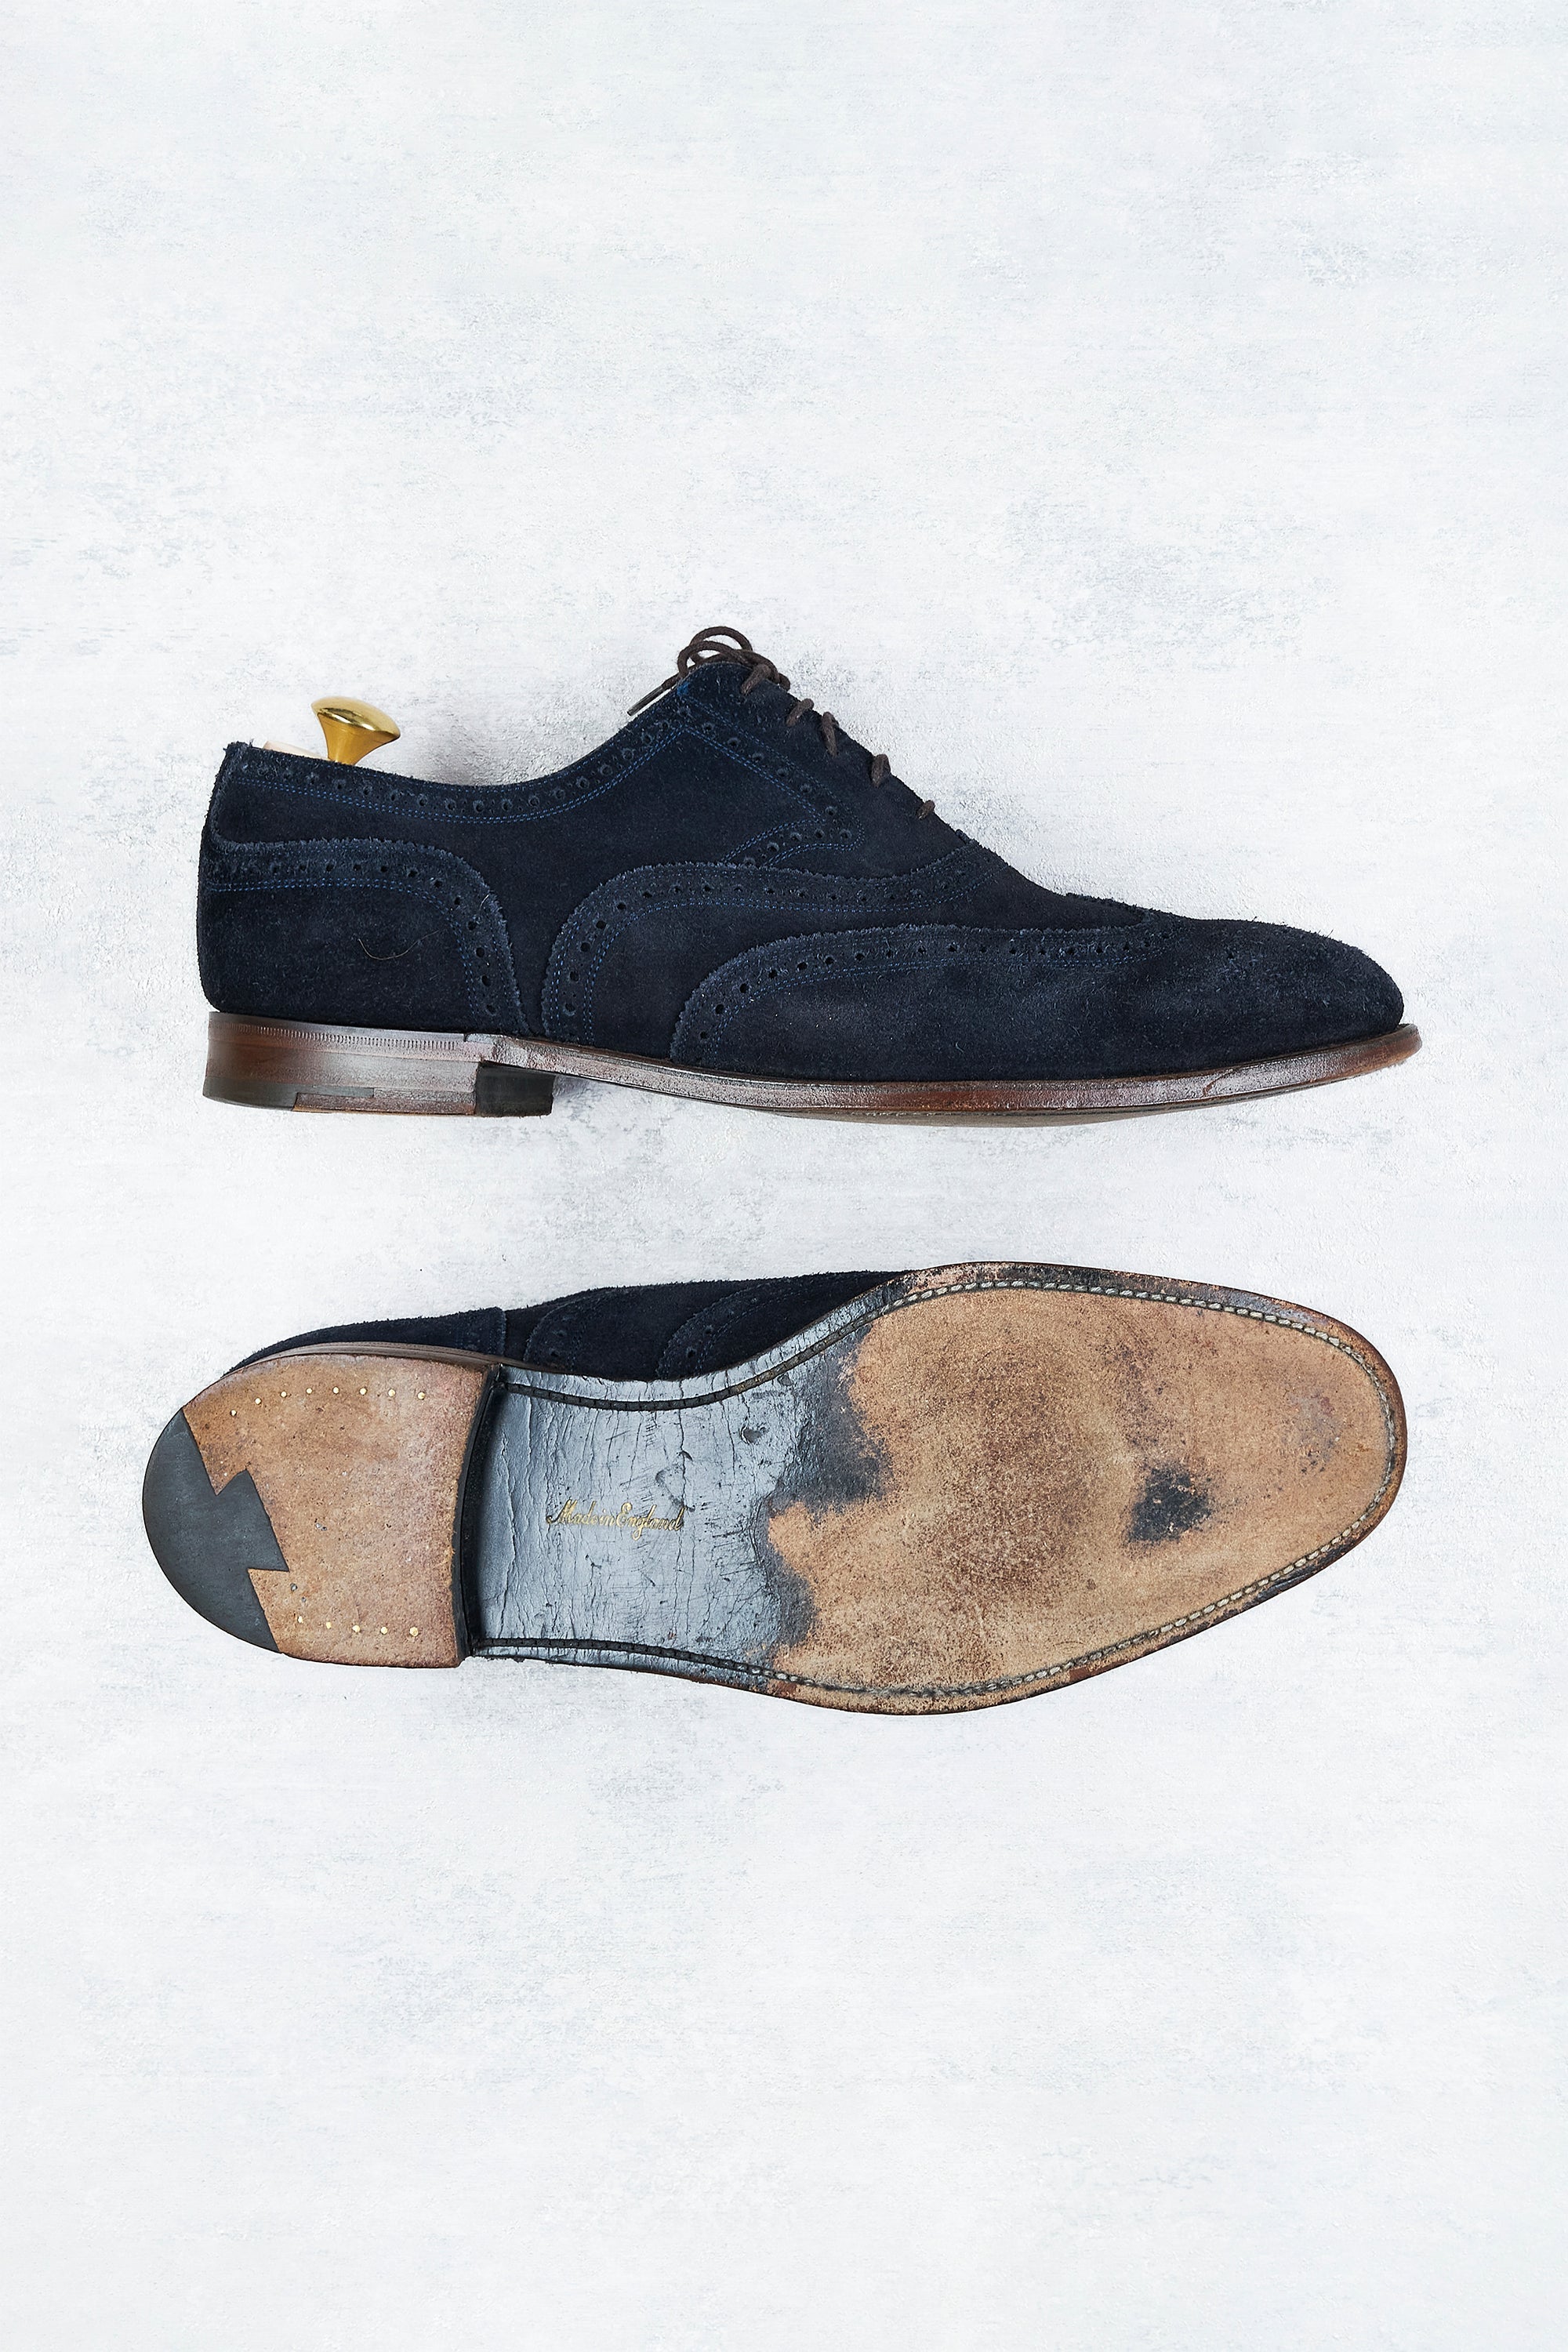 Gieves & Hawkes Navy Suede Wingtip Oxford Shoes